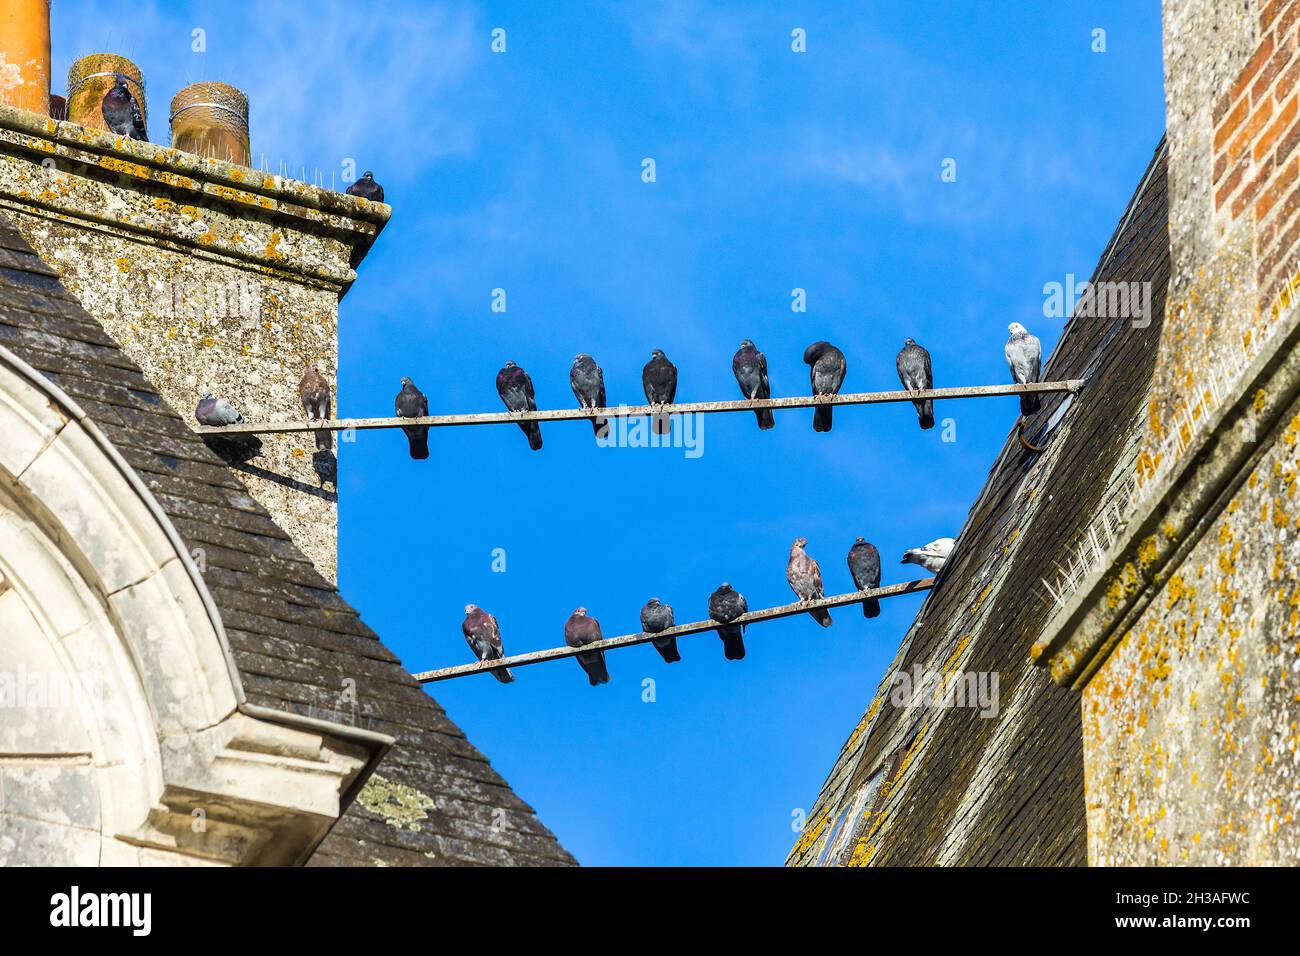 Pigeons perched on roof reinforcing bars at the Chateau of Azay-le-Ferron, Indre (36), France. Stock Photo